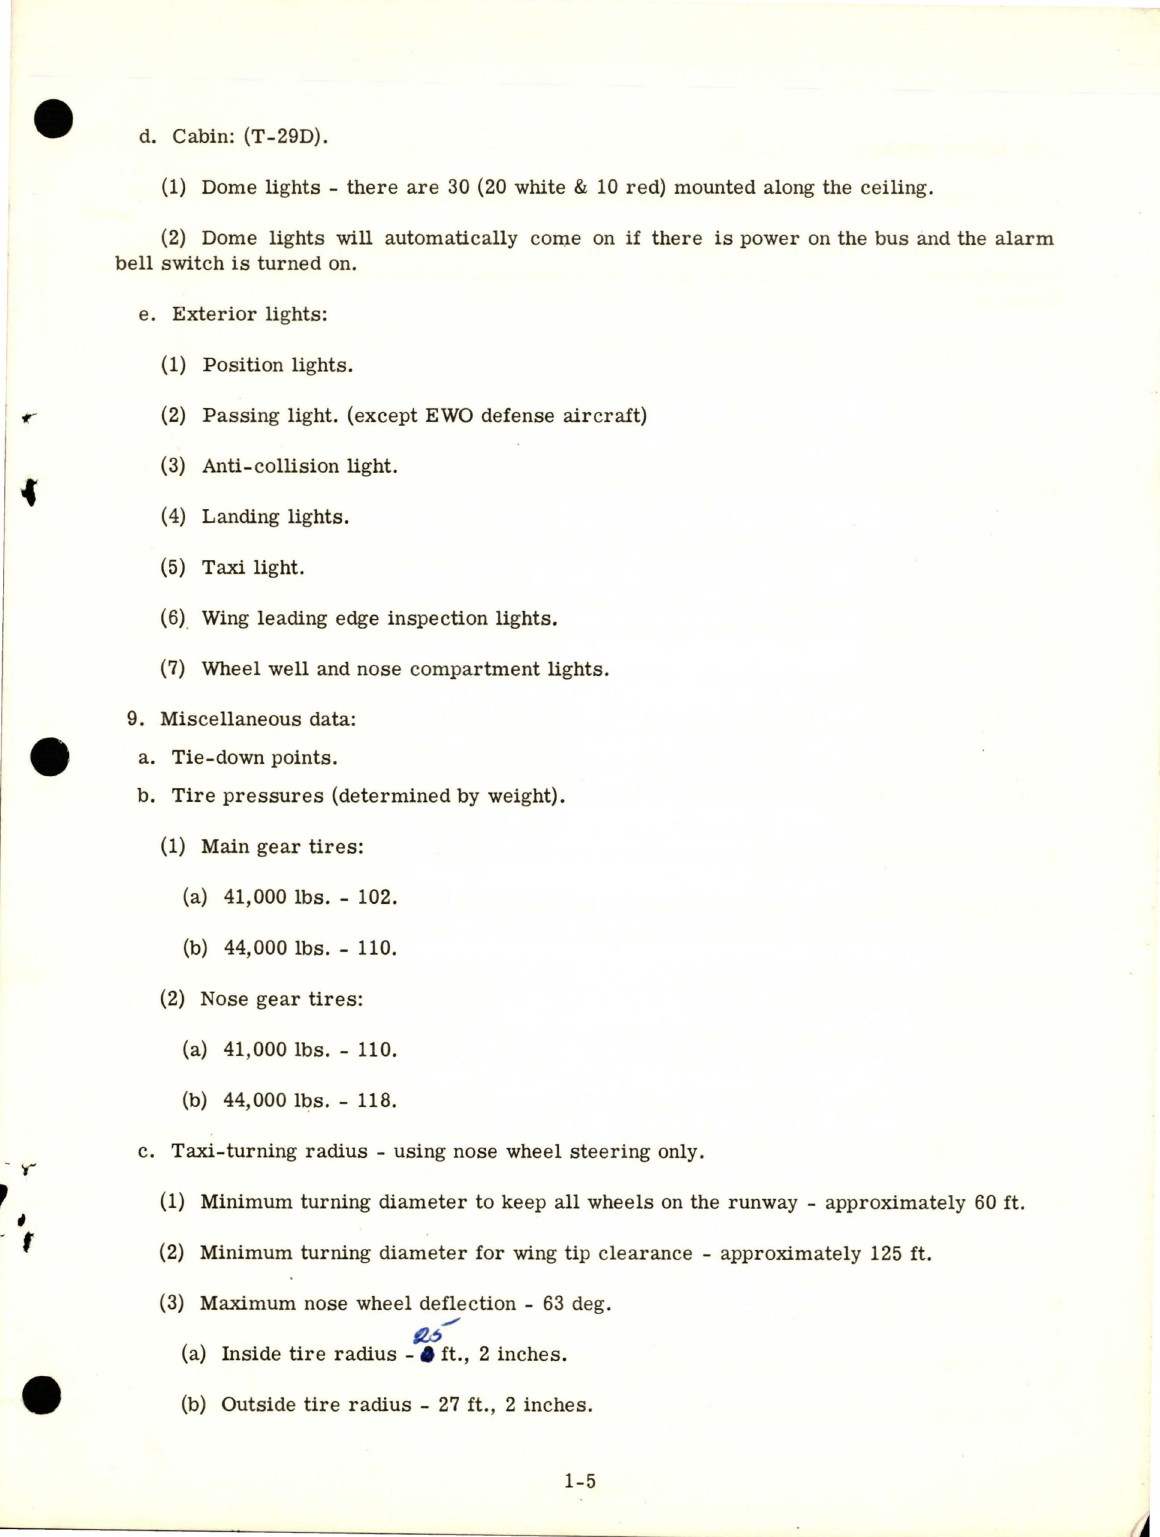 Sample page 9 from AirCorps Library document: Engineering Workbook for Pilots for T-29